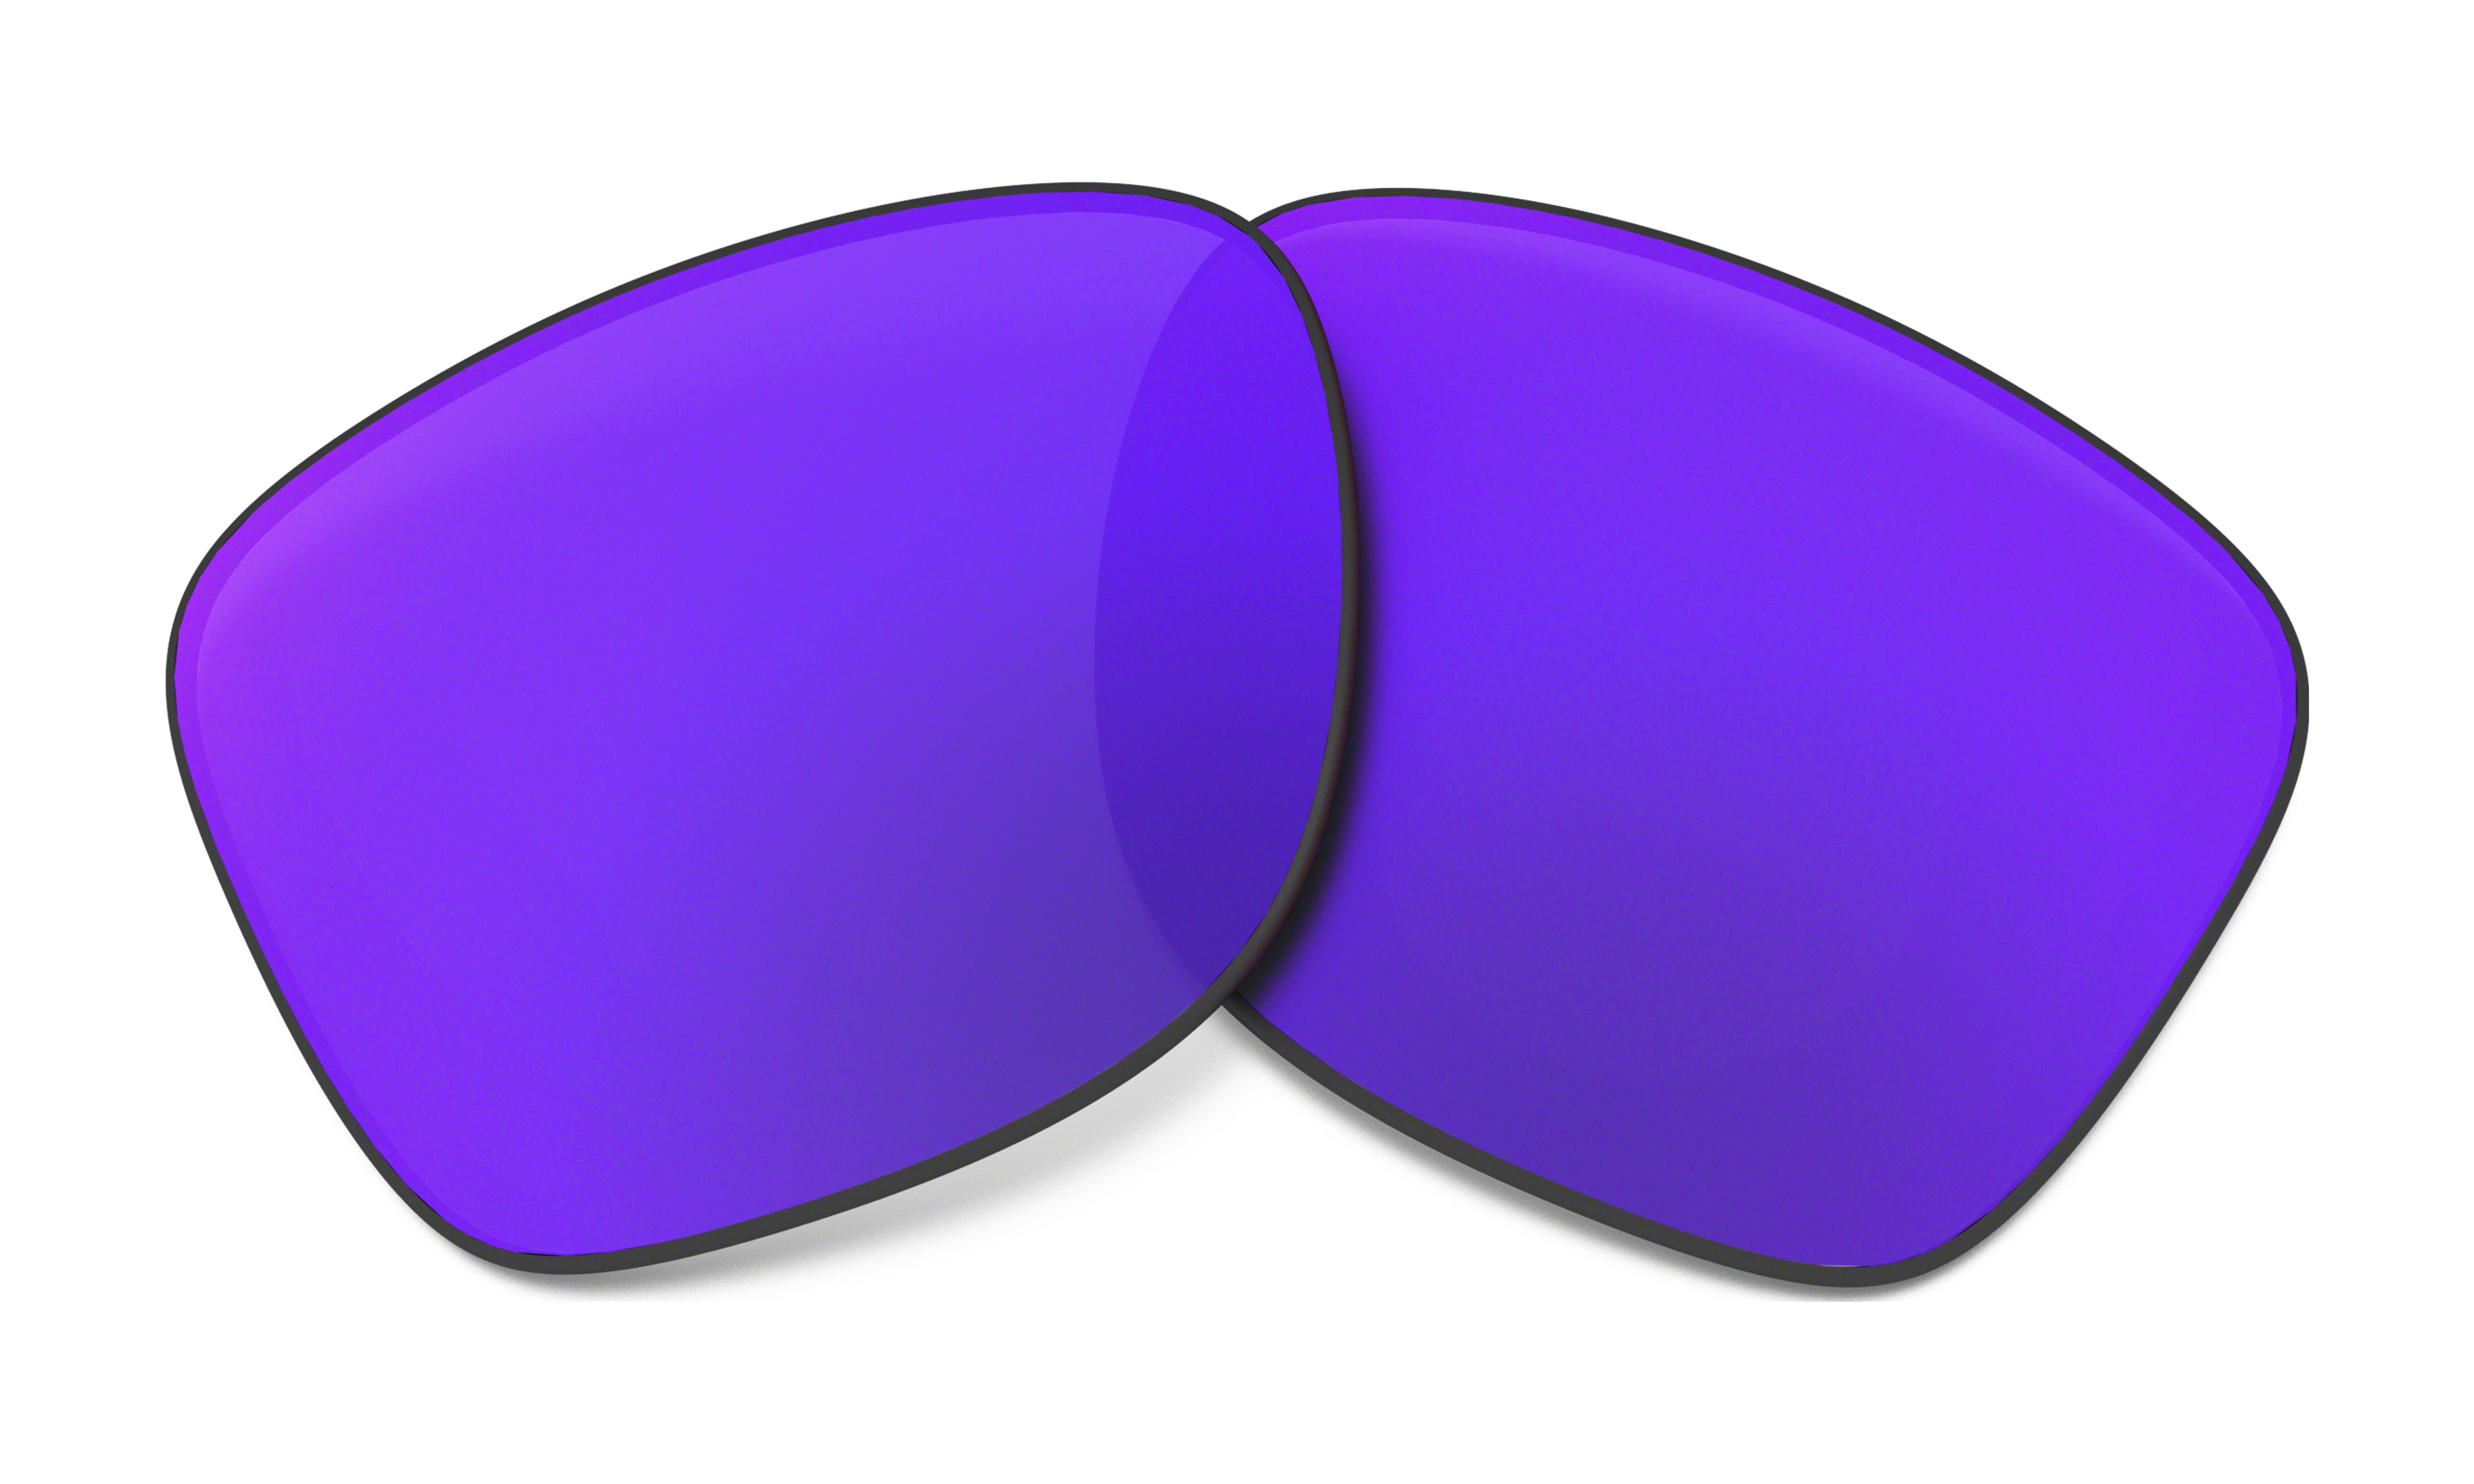 oakley replacement lenses